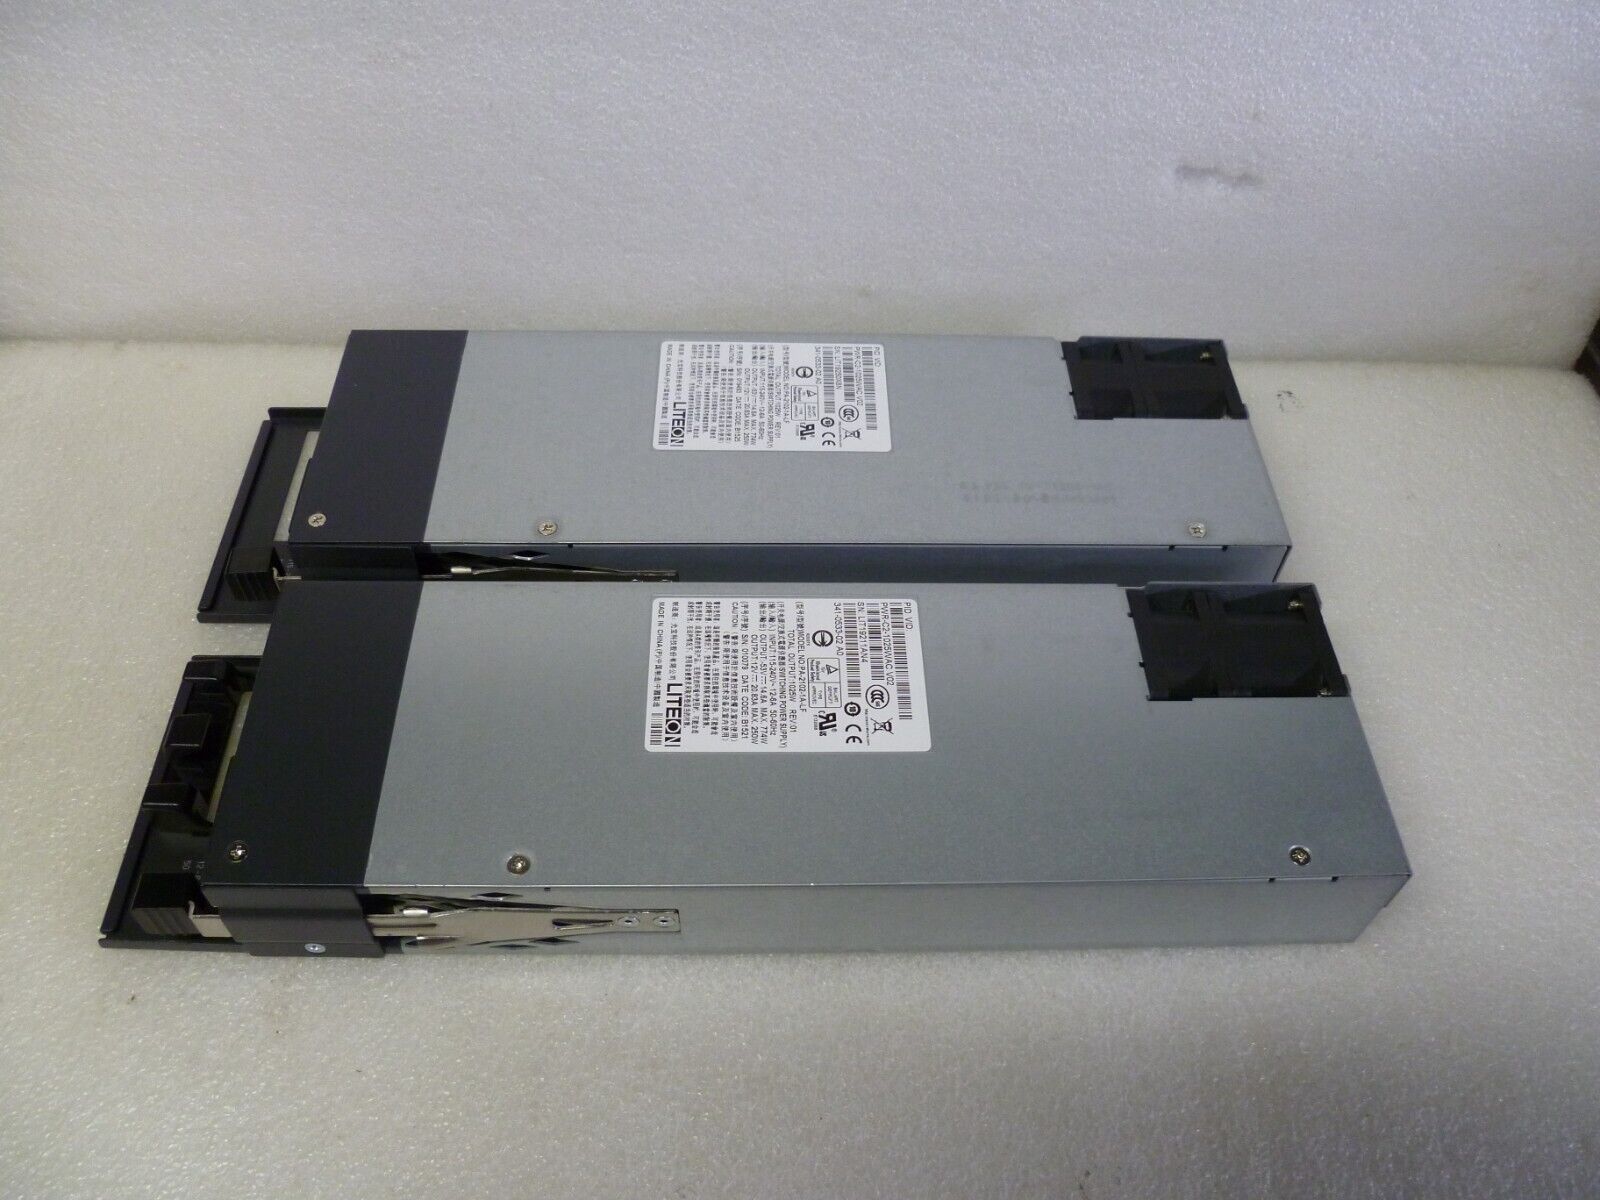 PAIR OF CISCO PWR-C2-1025WAC 1025W SWITCHING POWER SUPPLY